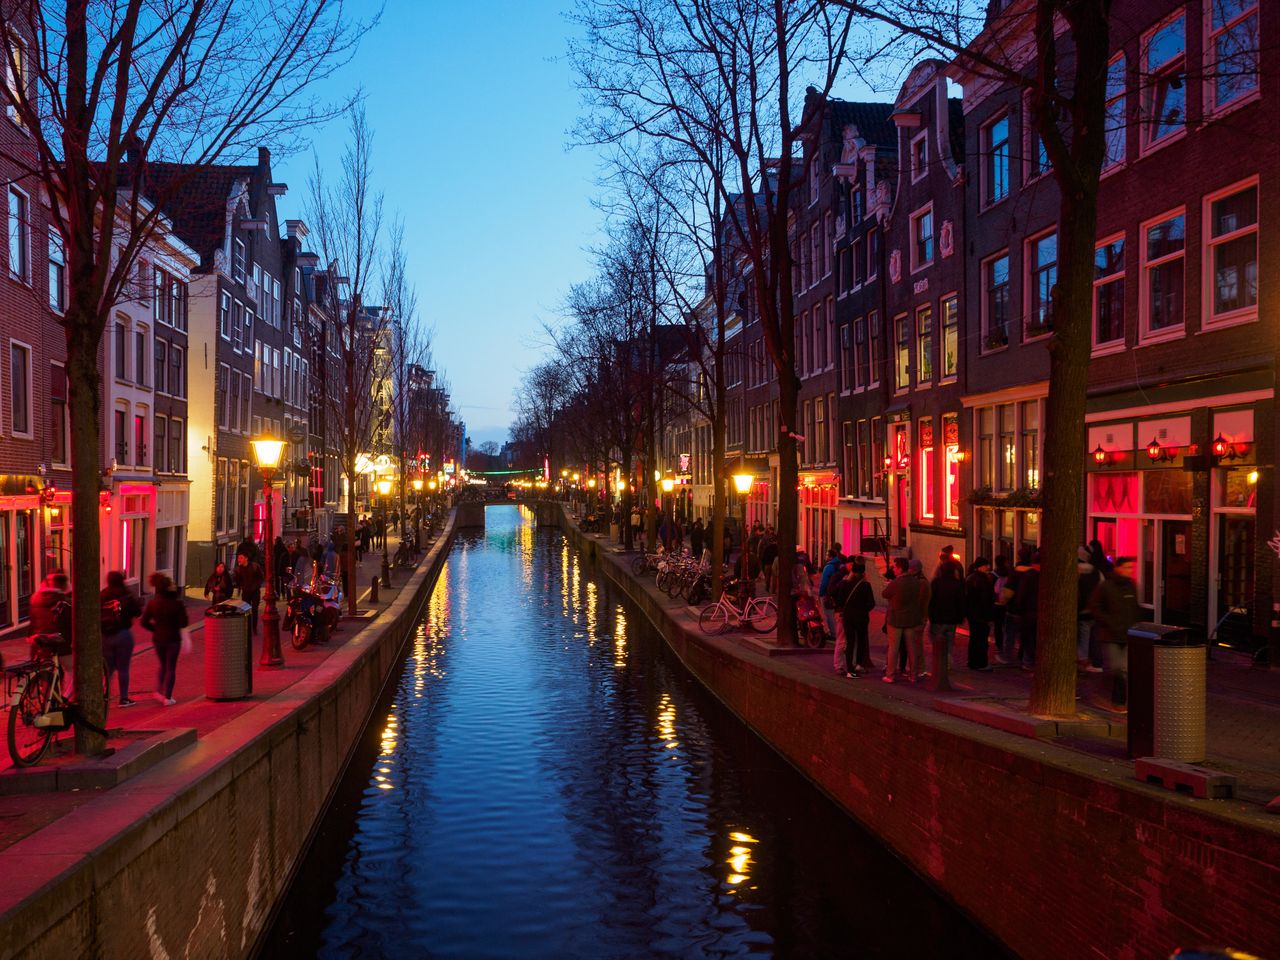 Amsterdam authorities are banning the smoking of Marijuana in the "red light" district.